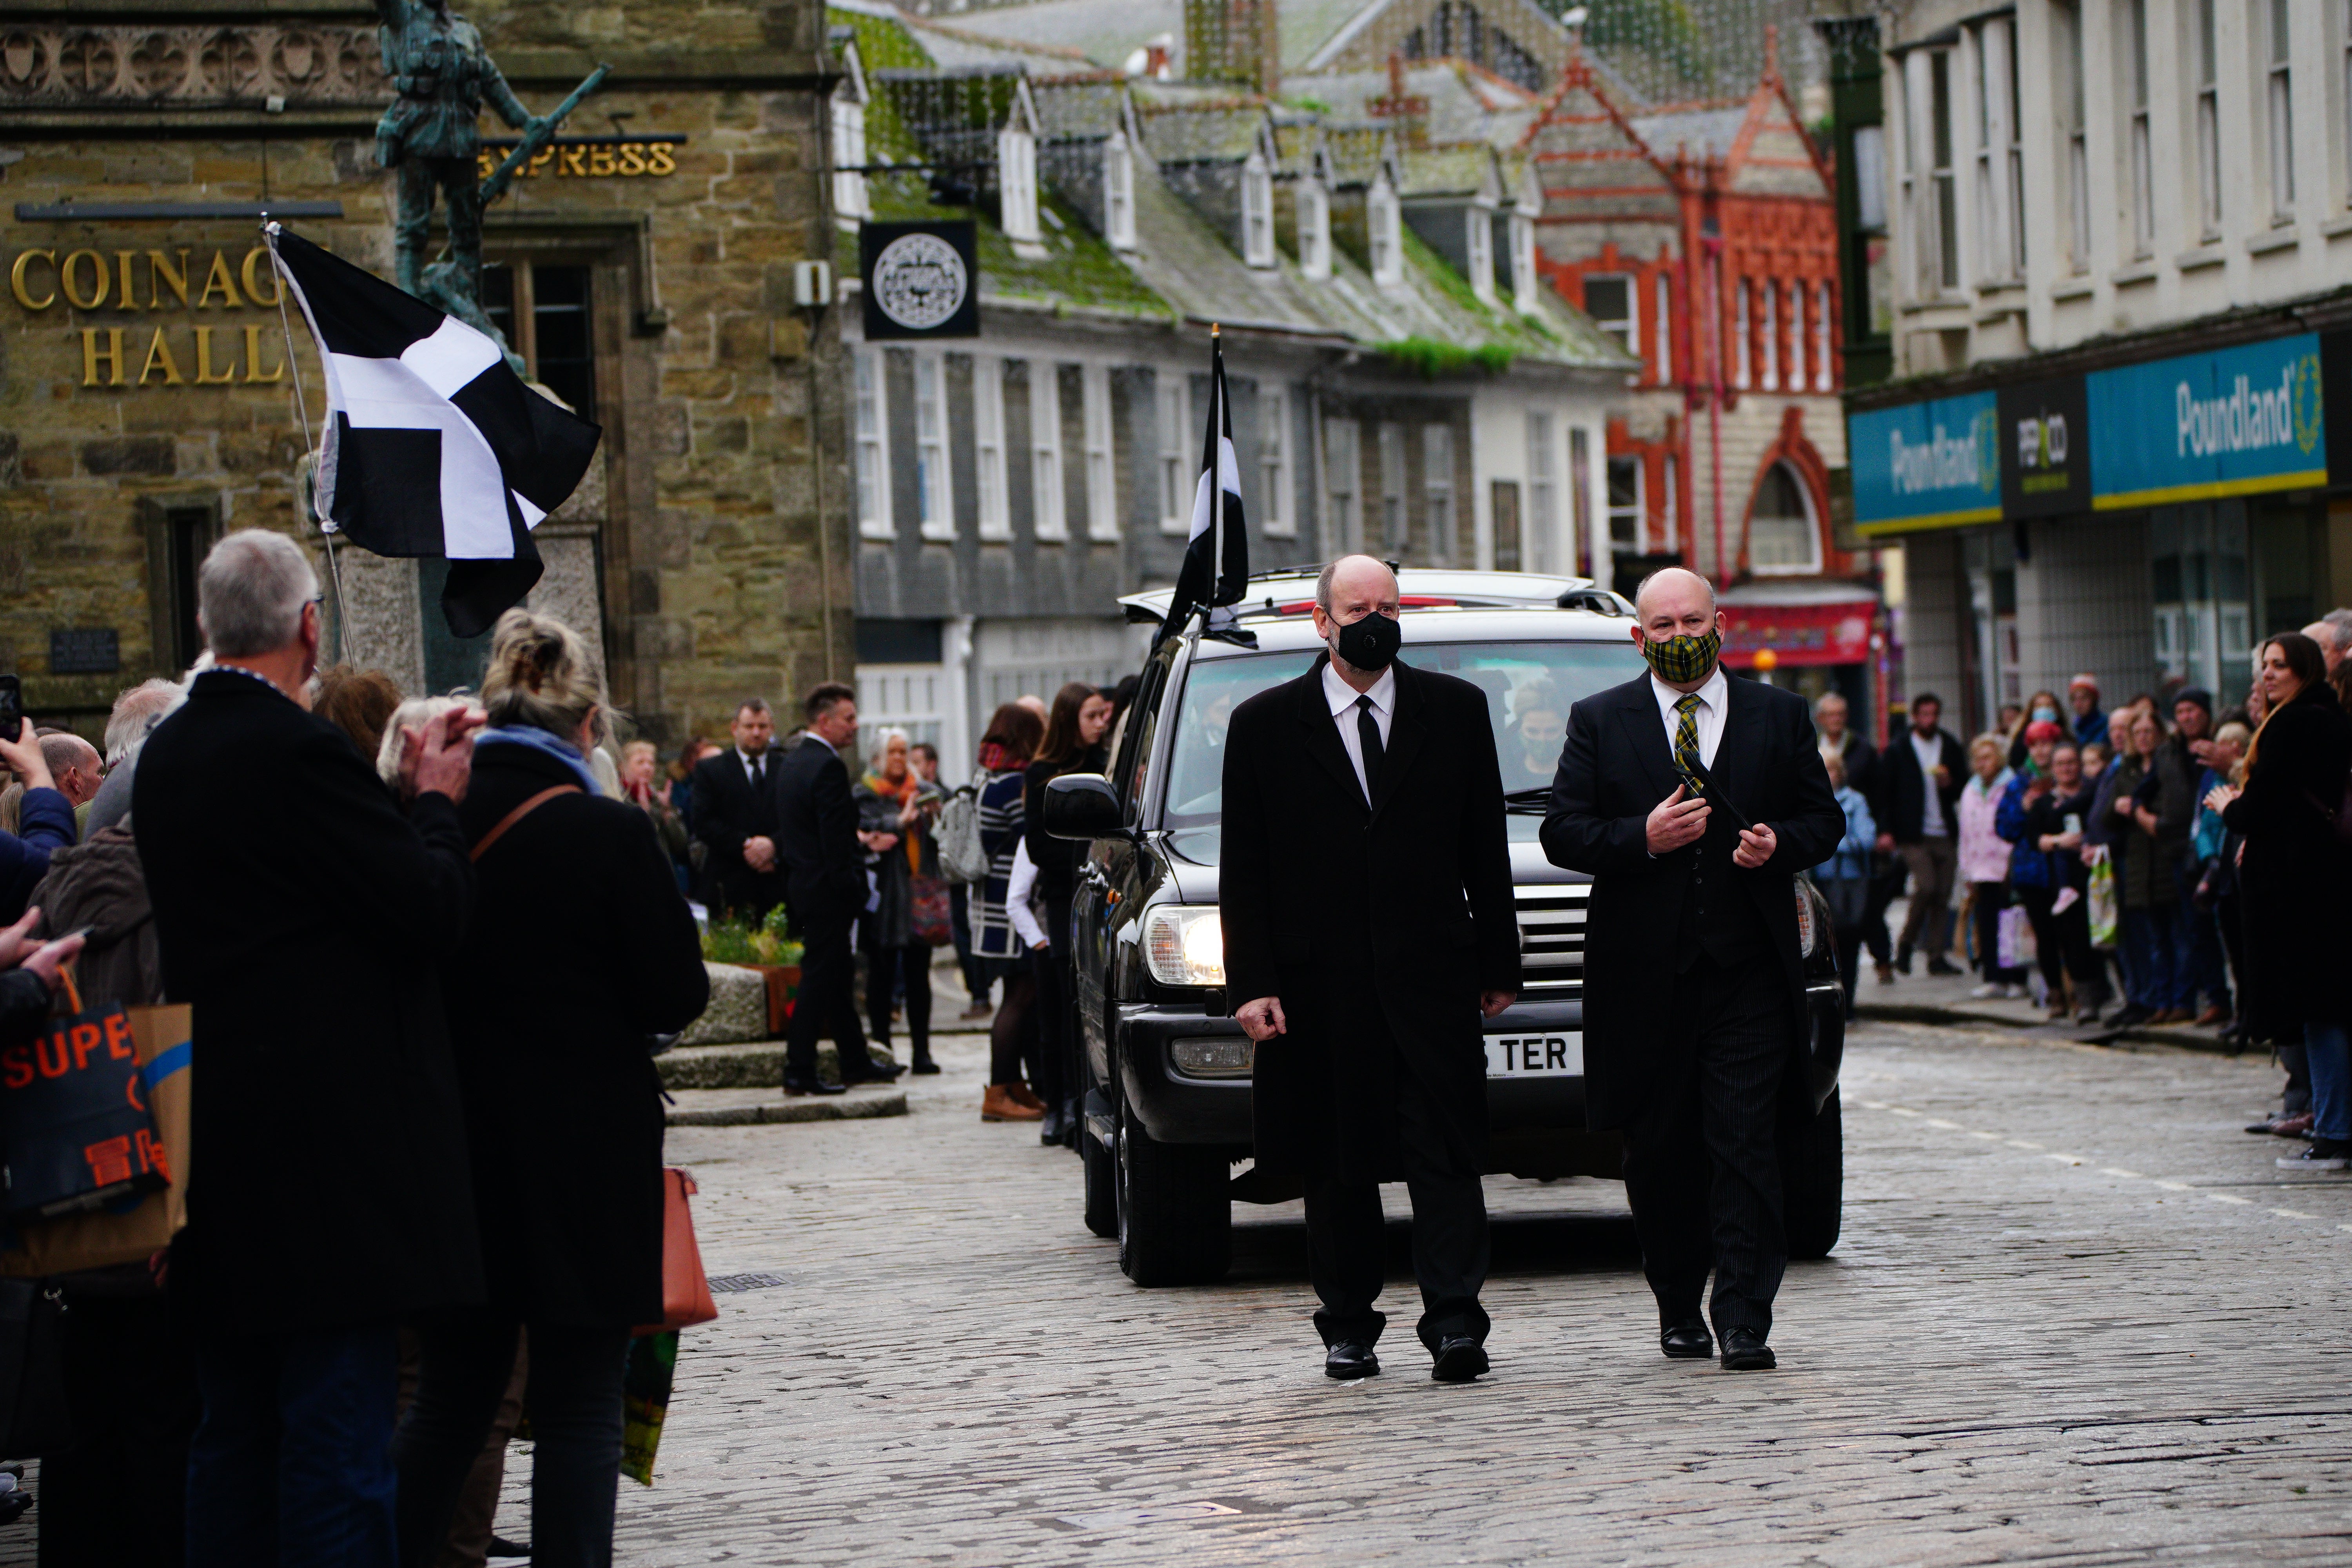 The funeral cortege leads the mourners as they arrive for the funeral of Cornish comedian Jethro at Truro Cathedral in Cornwall. Jethro, real name Geoffrey Rowe, died on December 14 after contracting Covid-19 (Ben Birchall/PA)